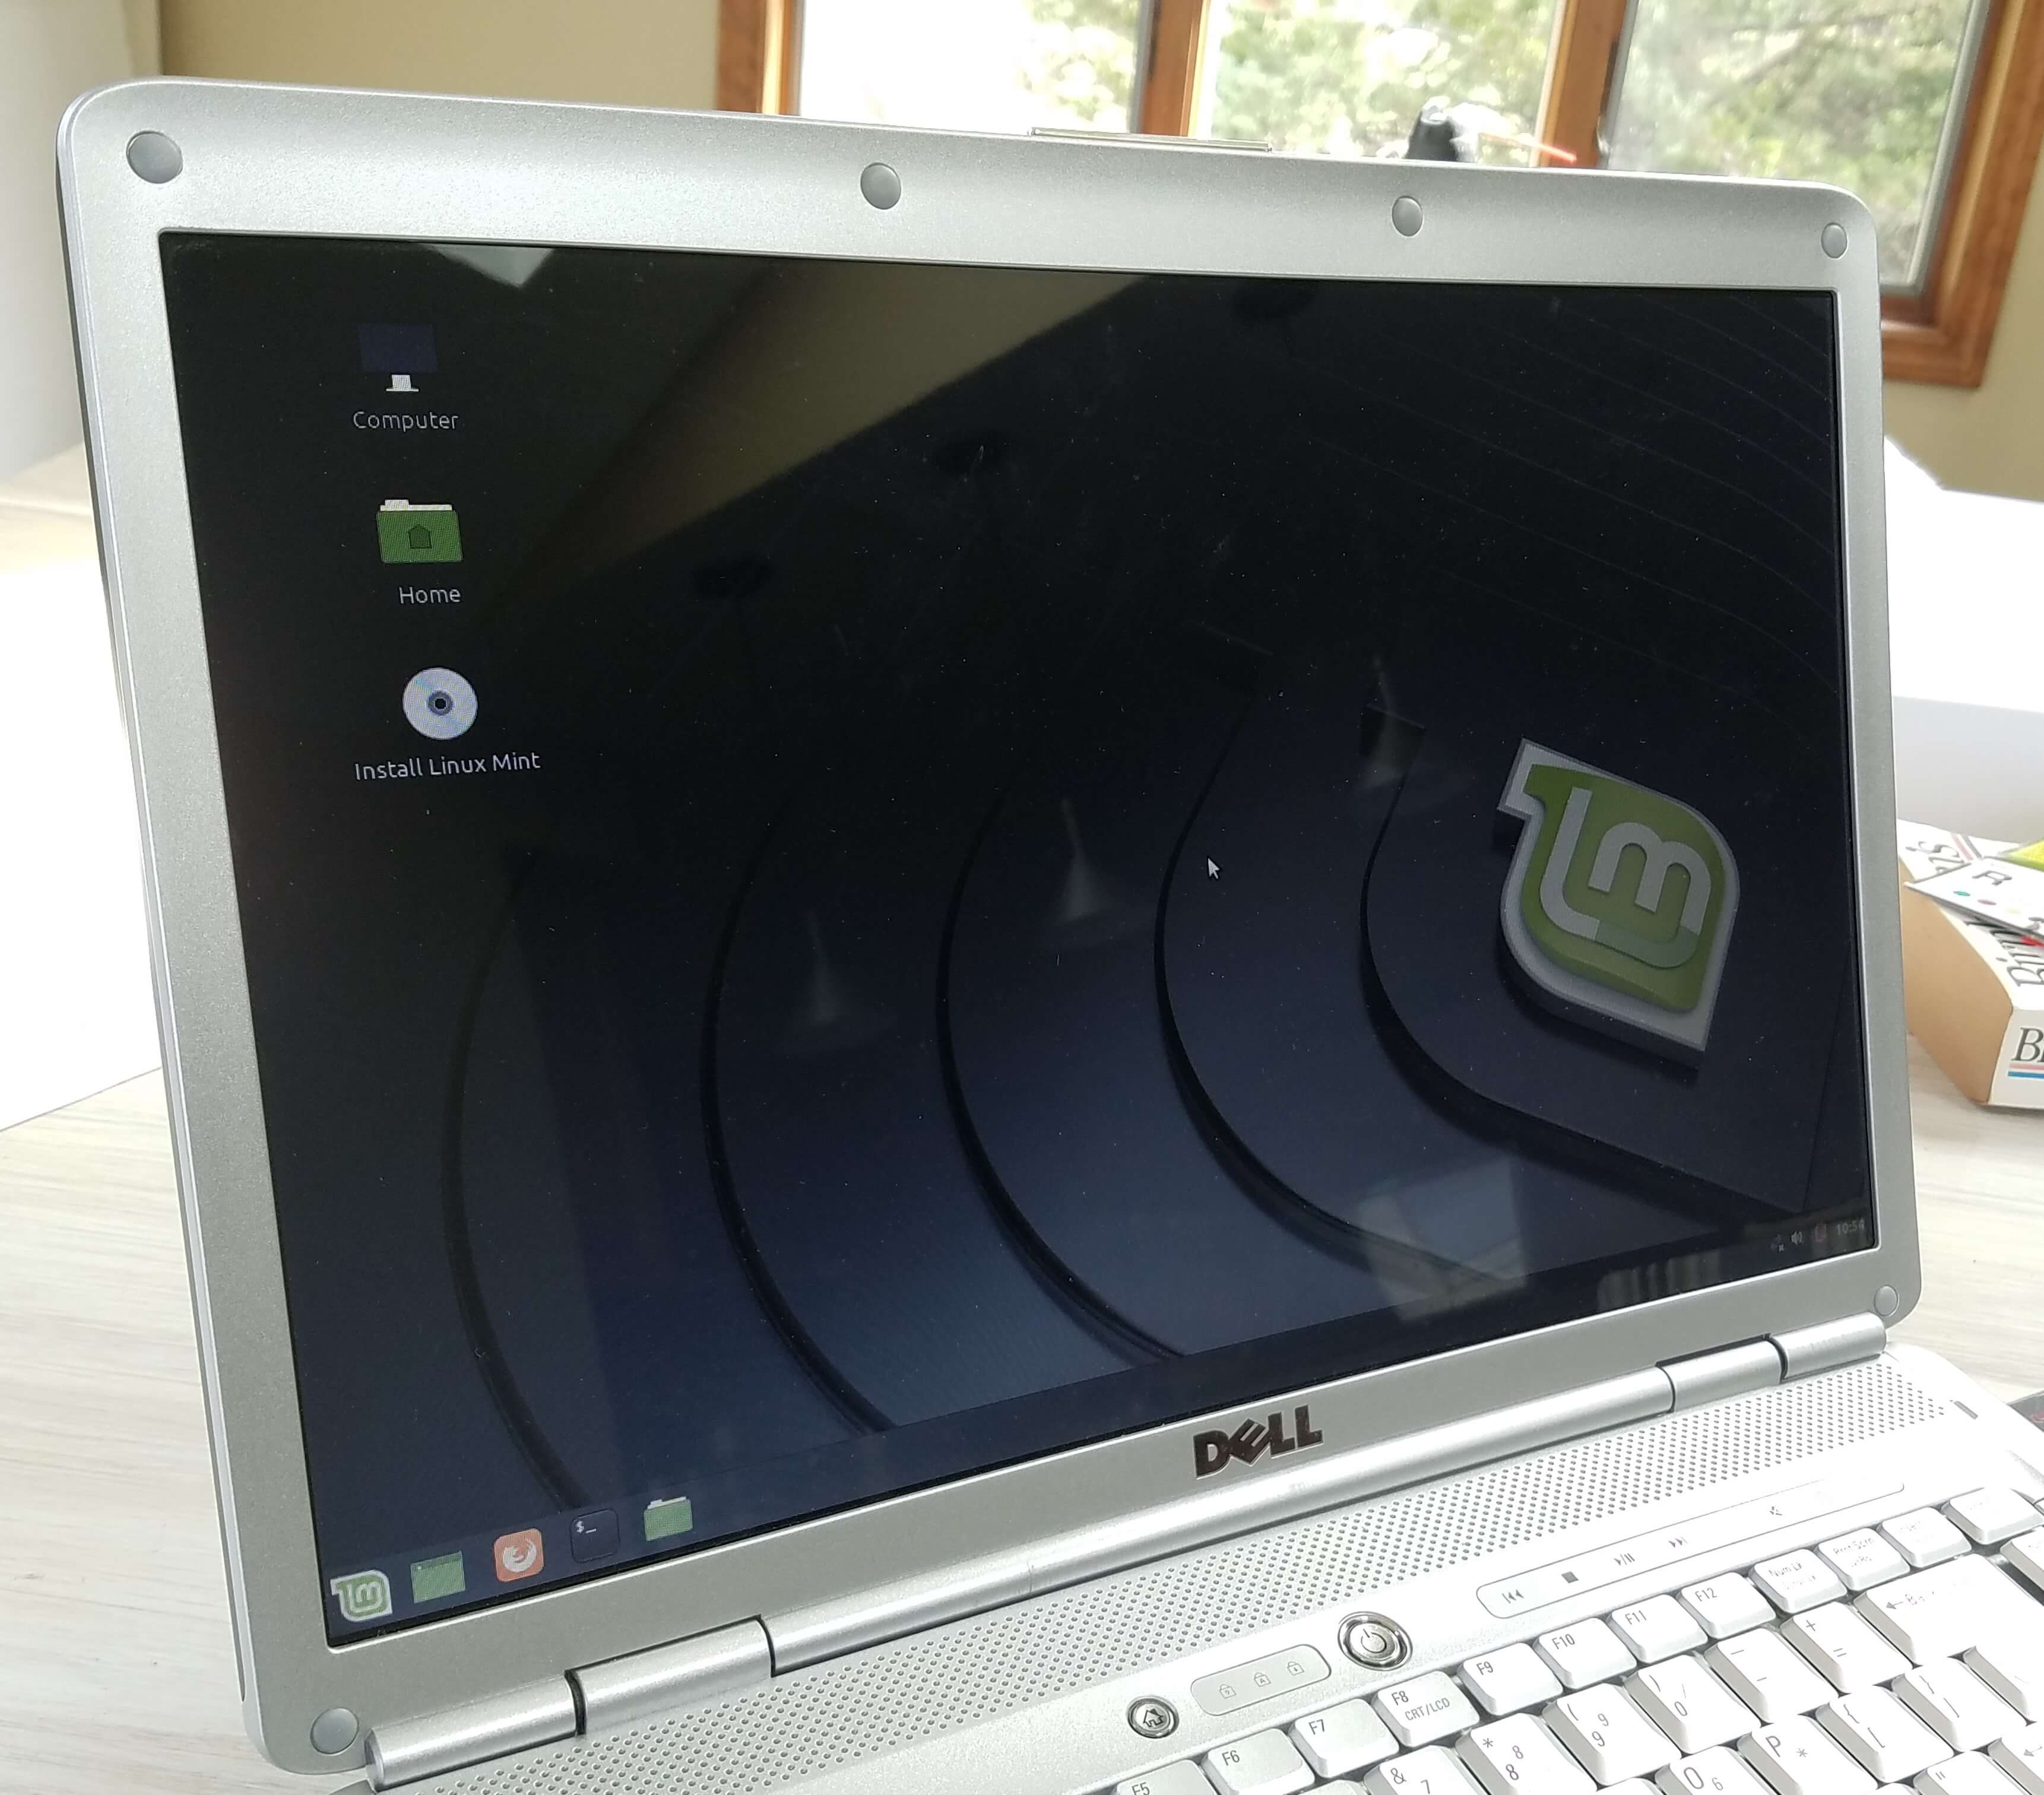 Linux Mint home screen